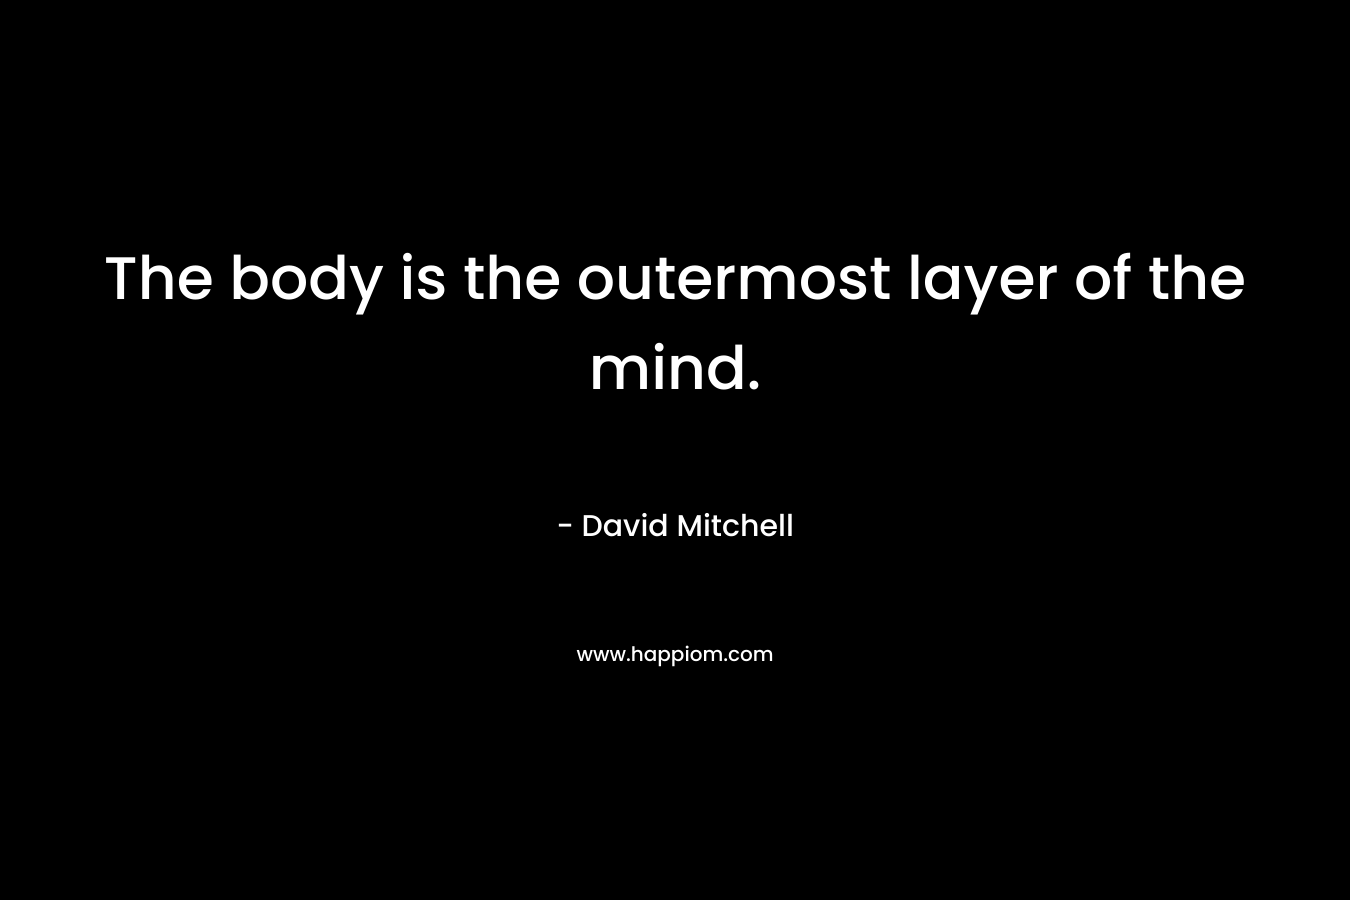 The body is the outermost layer of the mind.